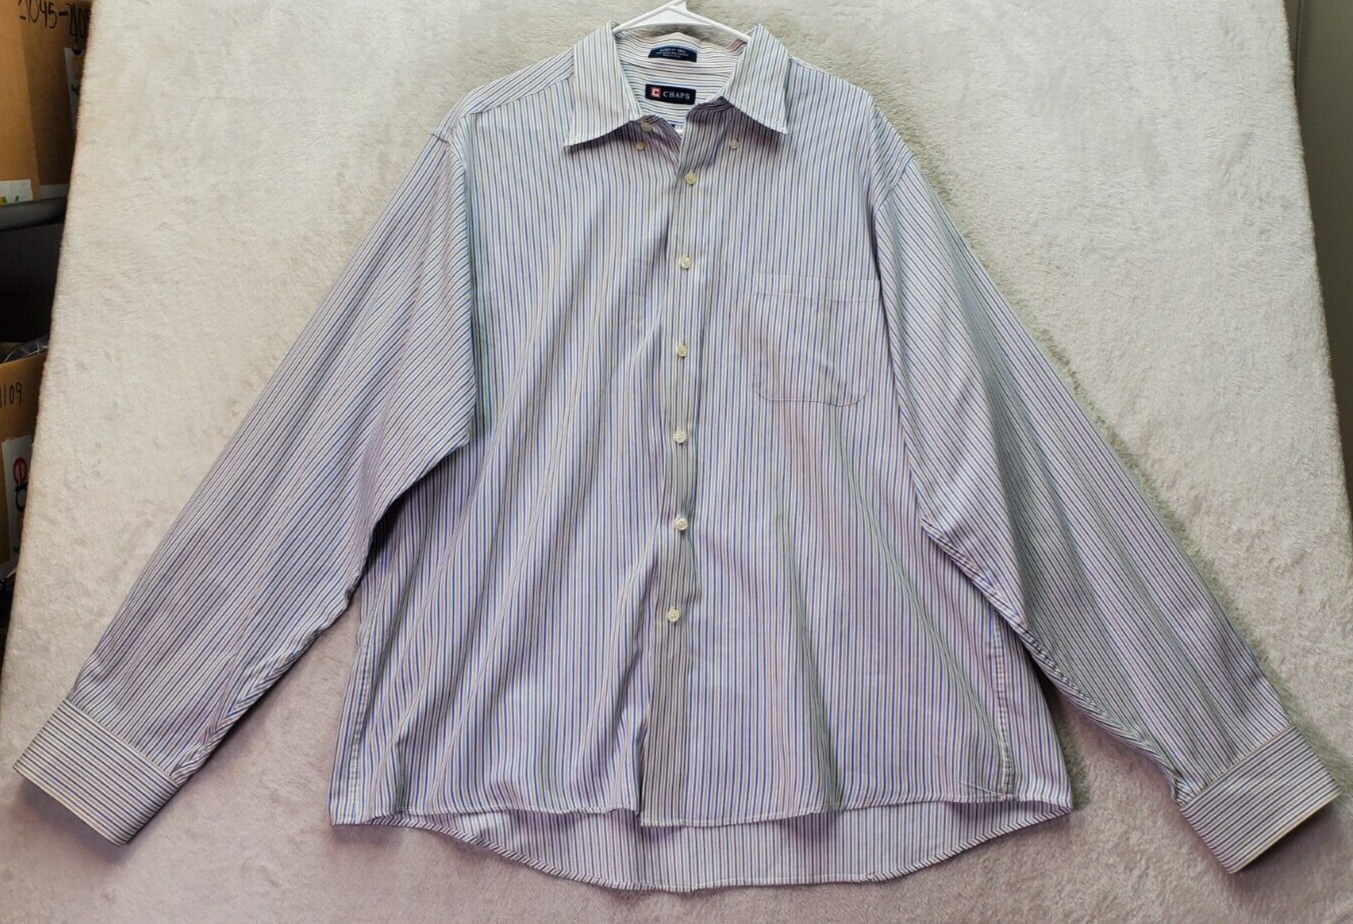 Primary image for Chaps Dress Shirt Men's Sz 17.5 Blue Tan Pinstripe Regular Fit Twill Button Down